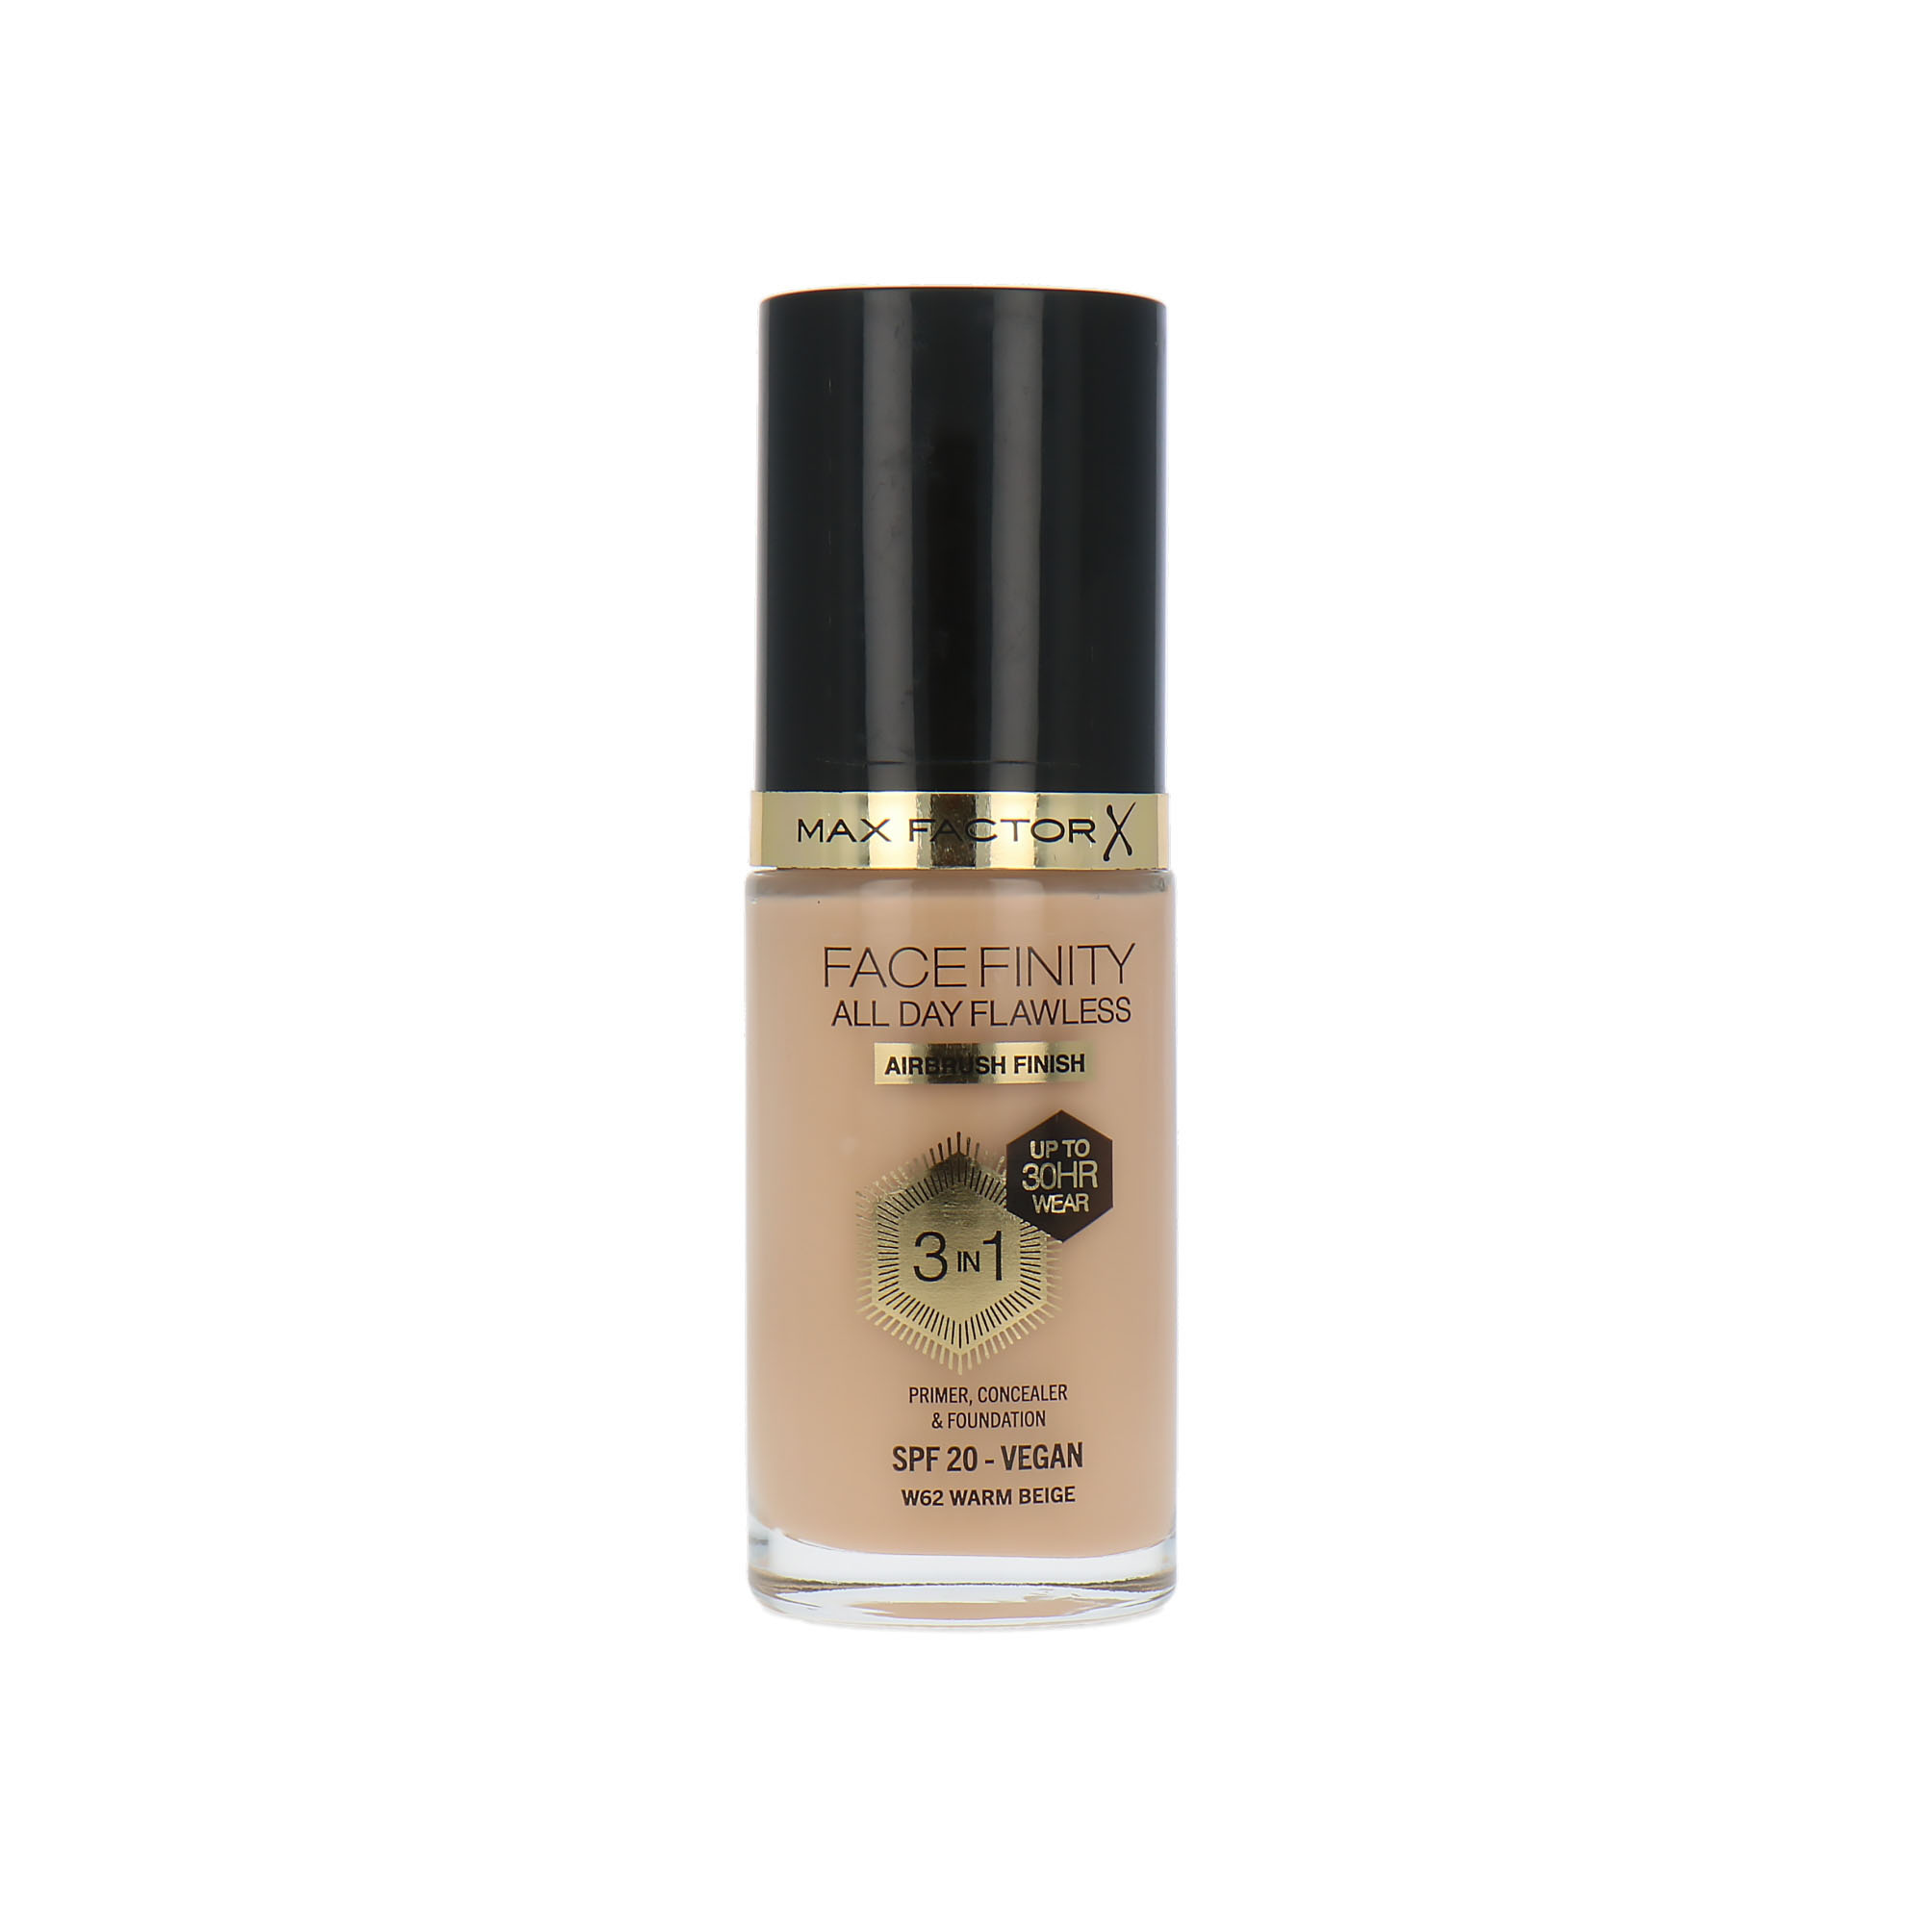 Max Factor Facefinity All Day Flawless 3 in 1 30H Airbrush Finish Fond de teint - W62 Warm Beige